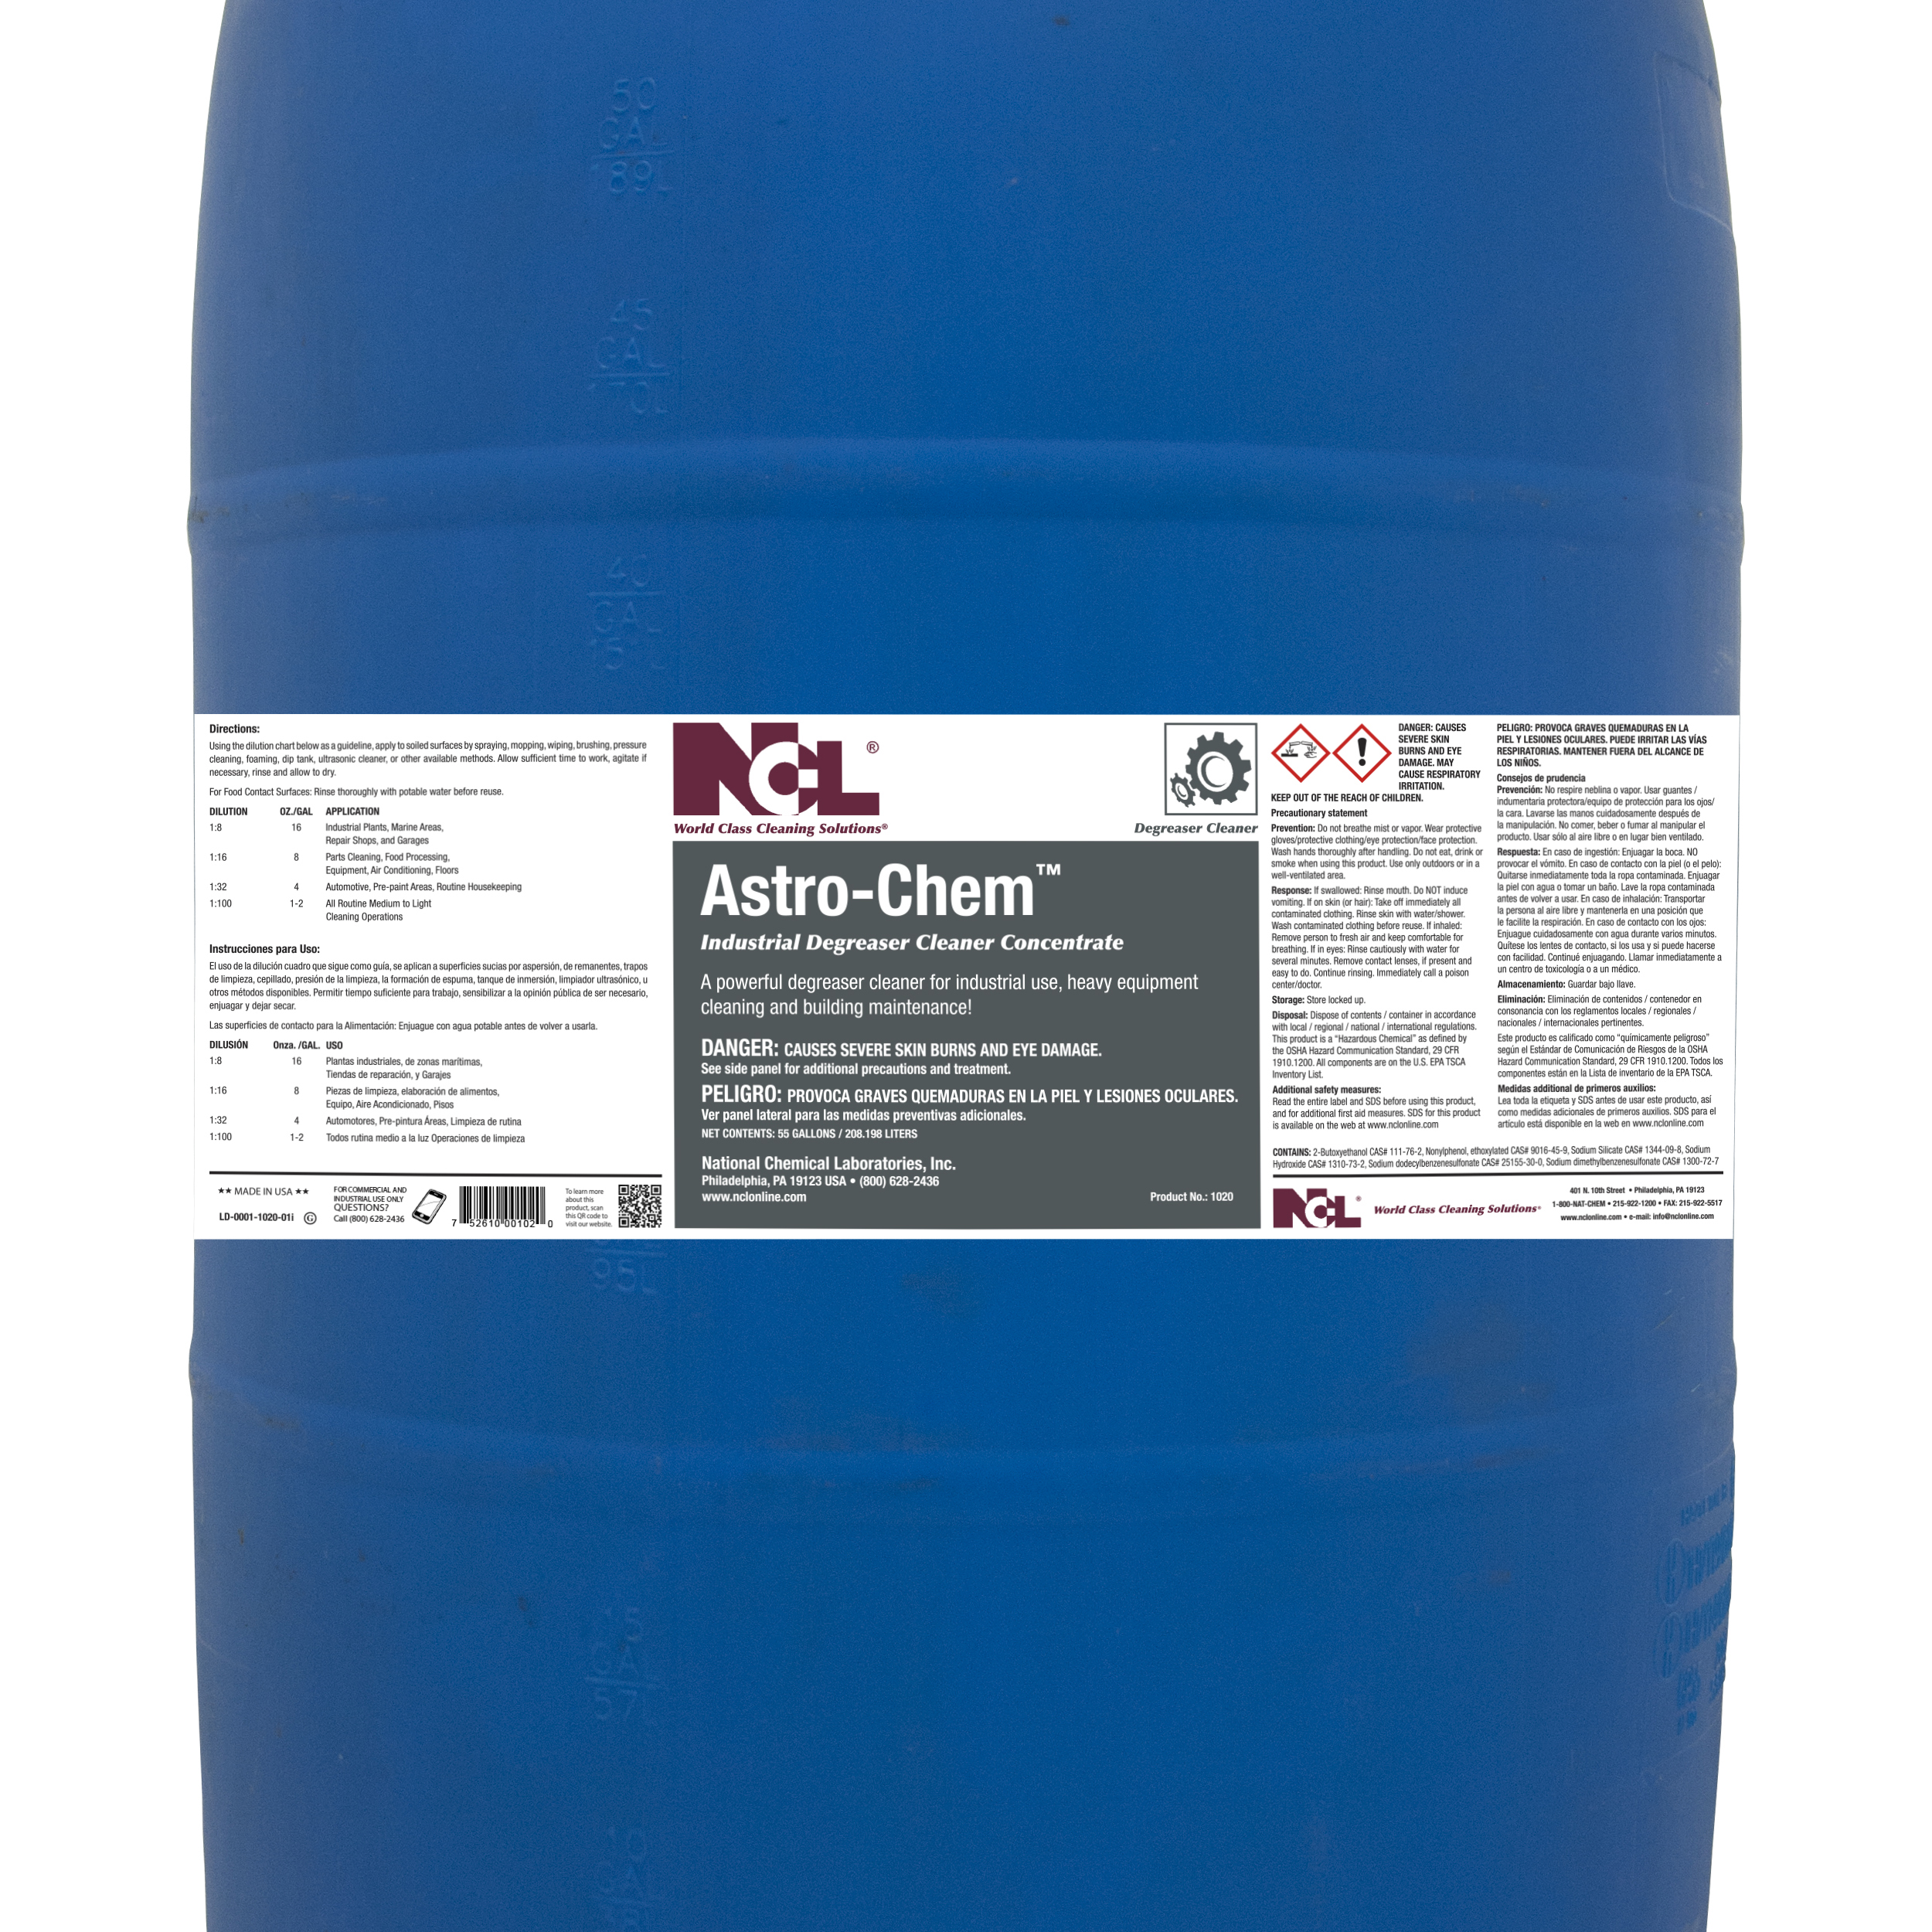  ASTRO-CHEM Industrial Degreaser Cleaner Concentrate 55 Gallon Drum (NCL1020-18) 